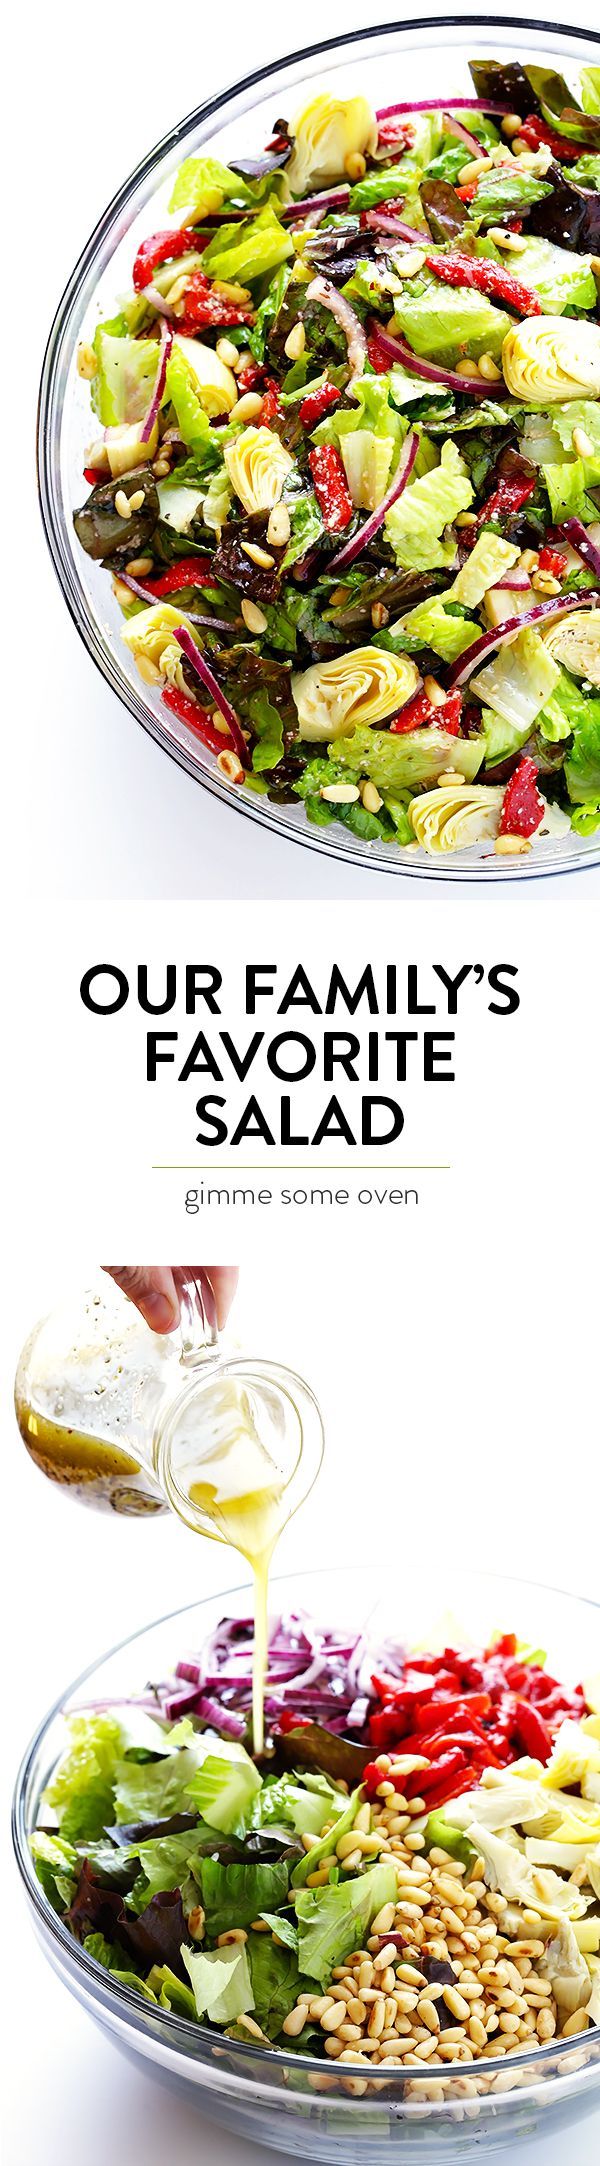 Our family’s favorite salad is made with lots of artichoke hearts, roasted red pep